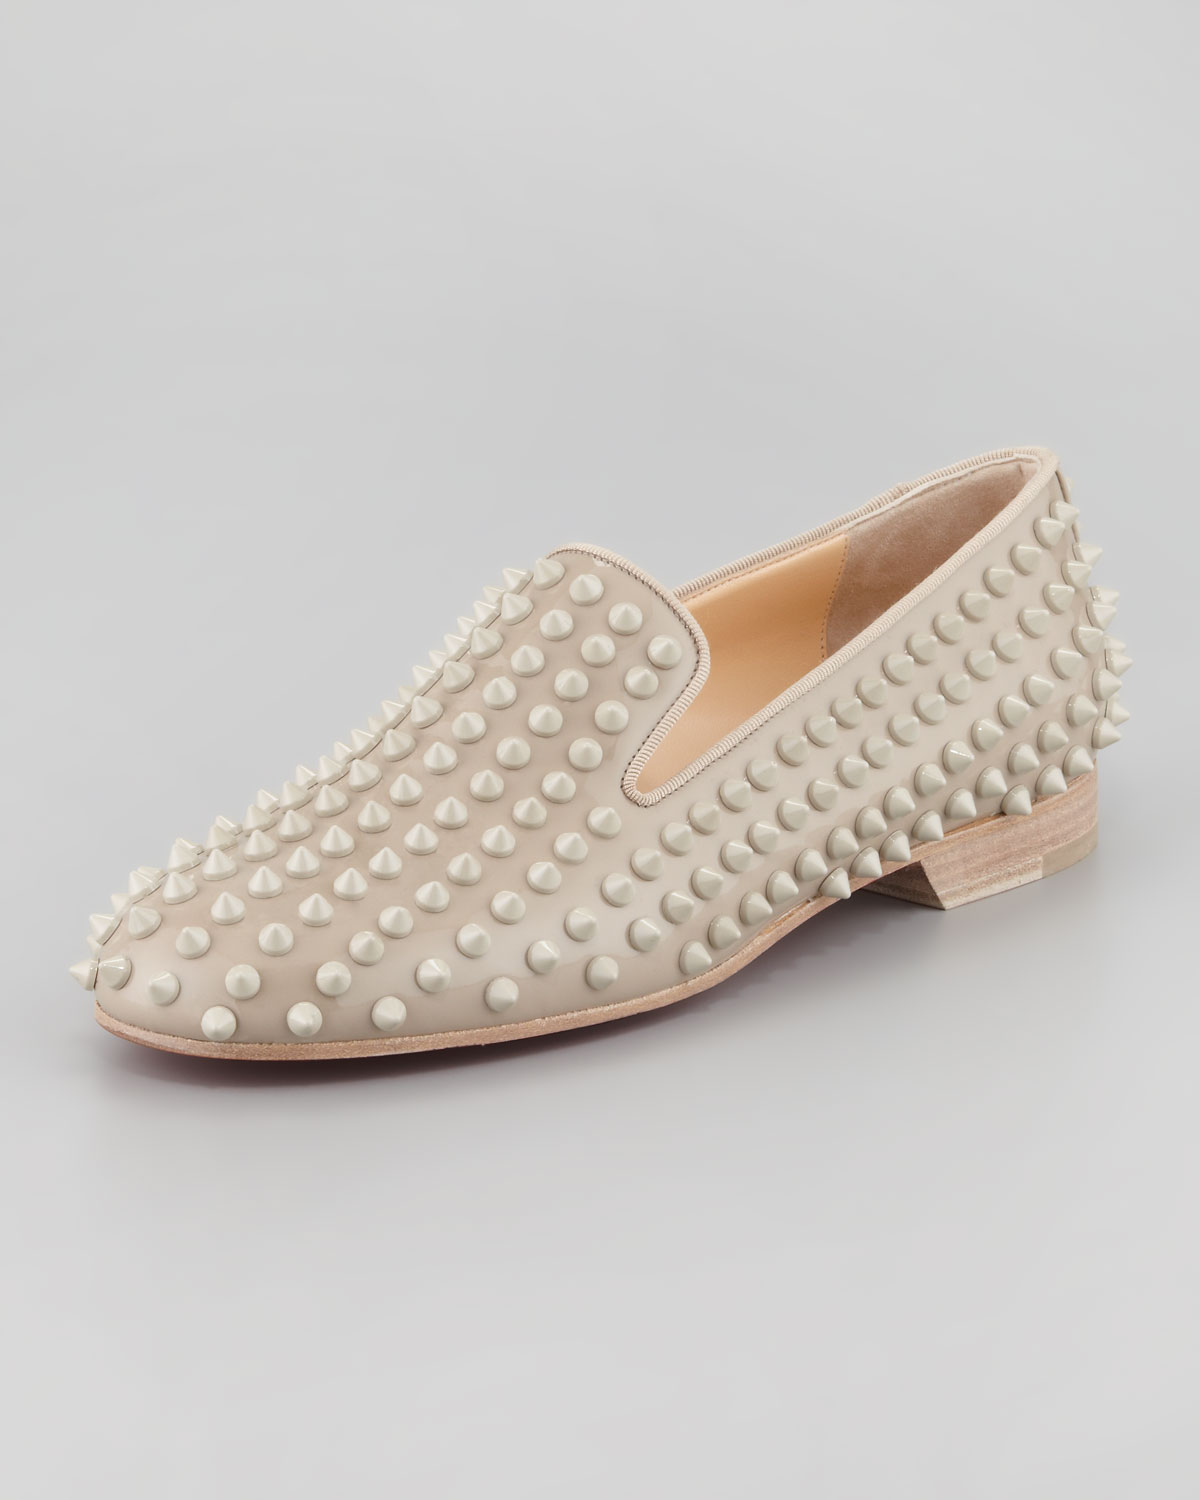 Christian louboutin Rolling Spikes Red Sole Smoking Slipper in ...